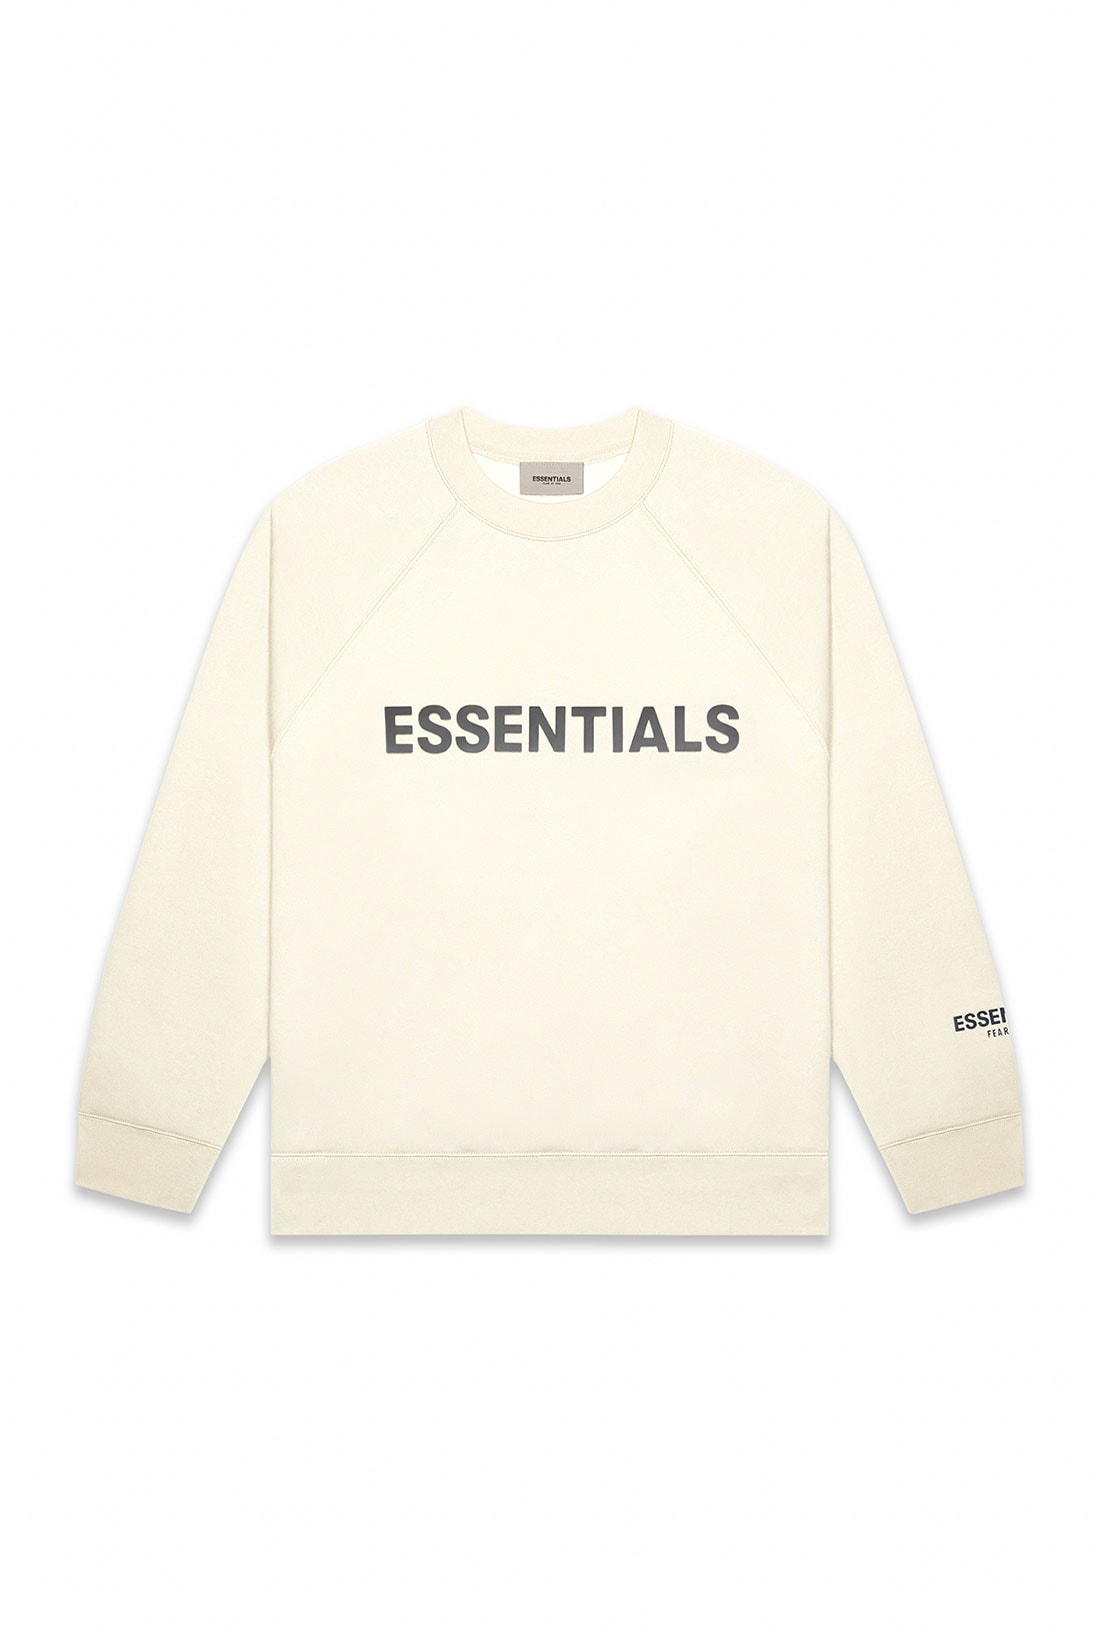 Fear of God ESSENTIALS to Drop Items for FW20 | Hypebae